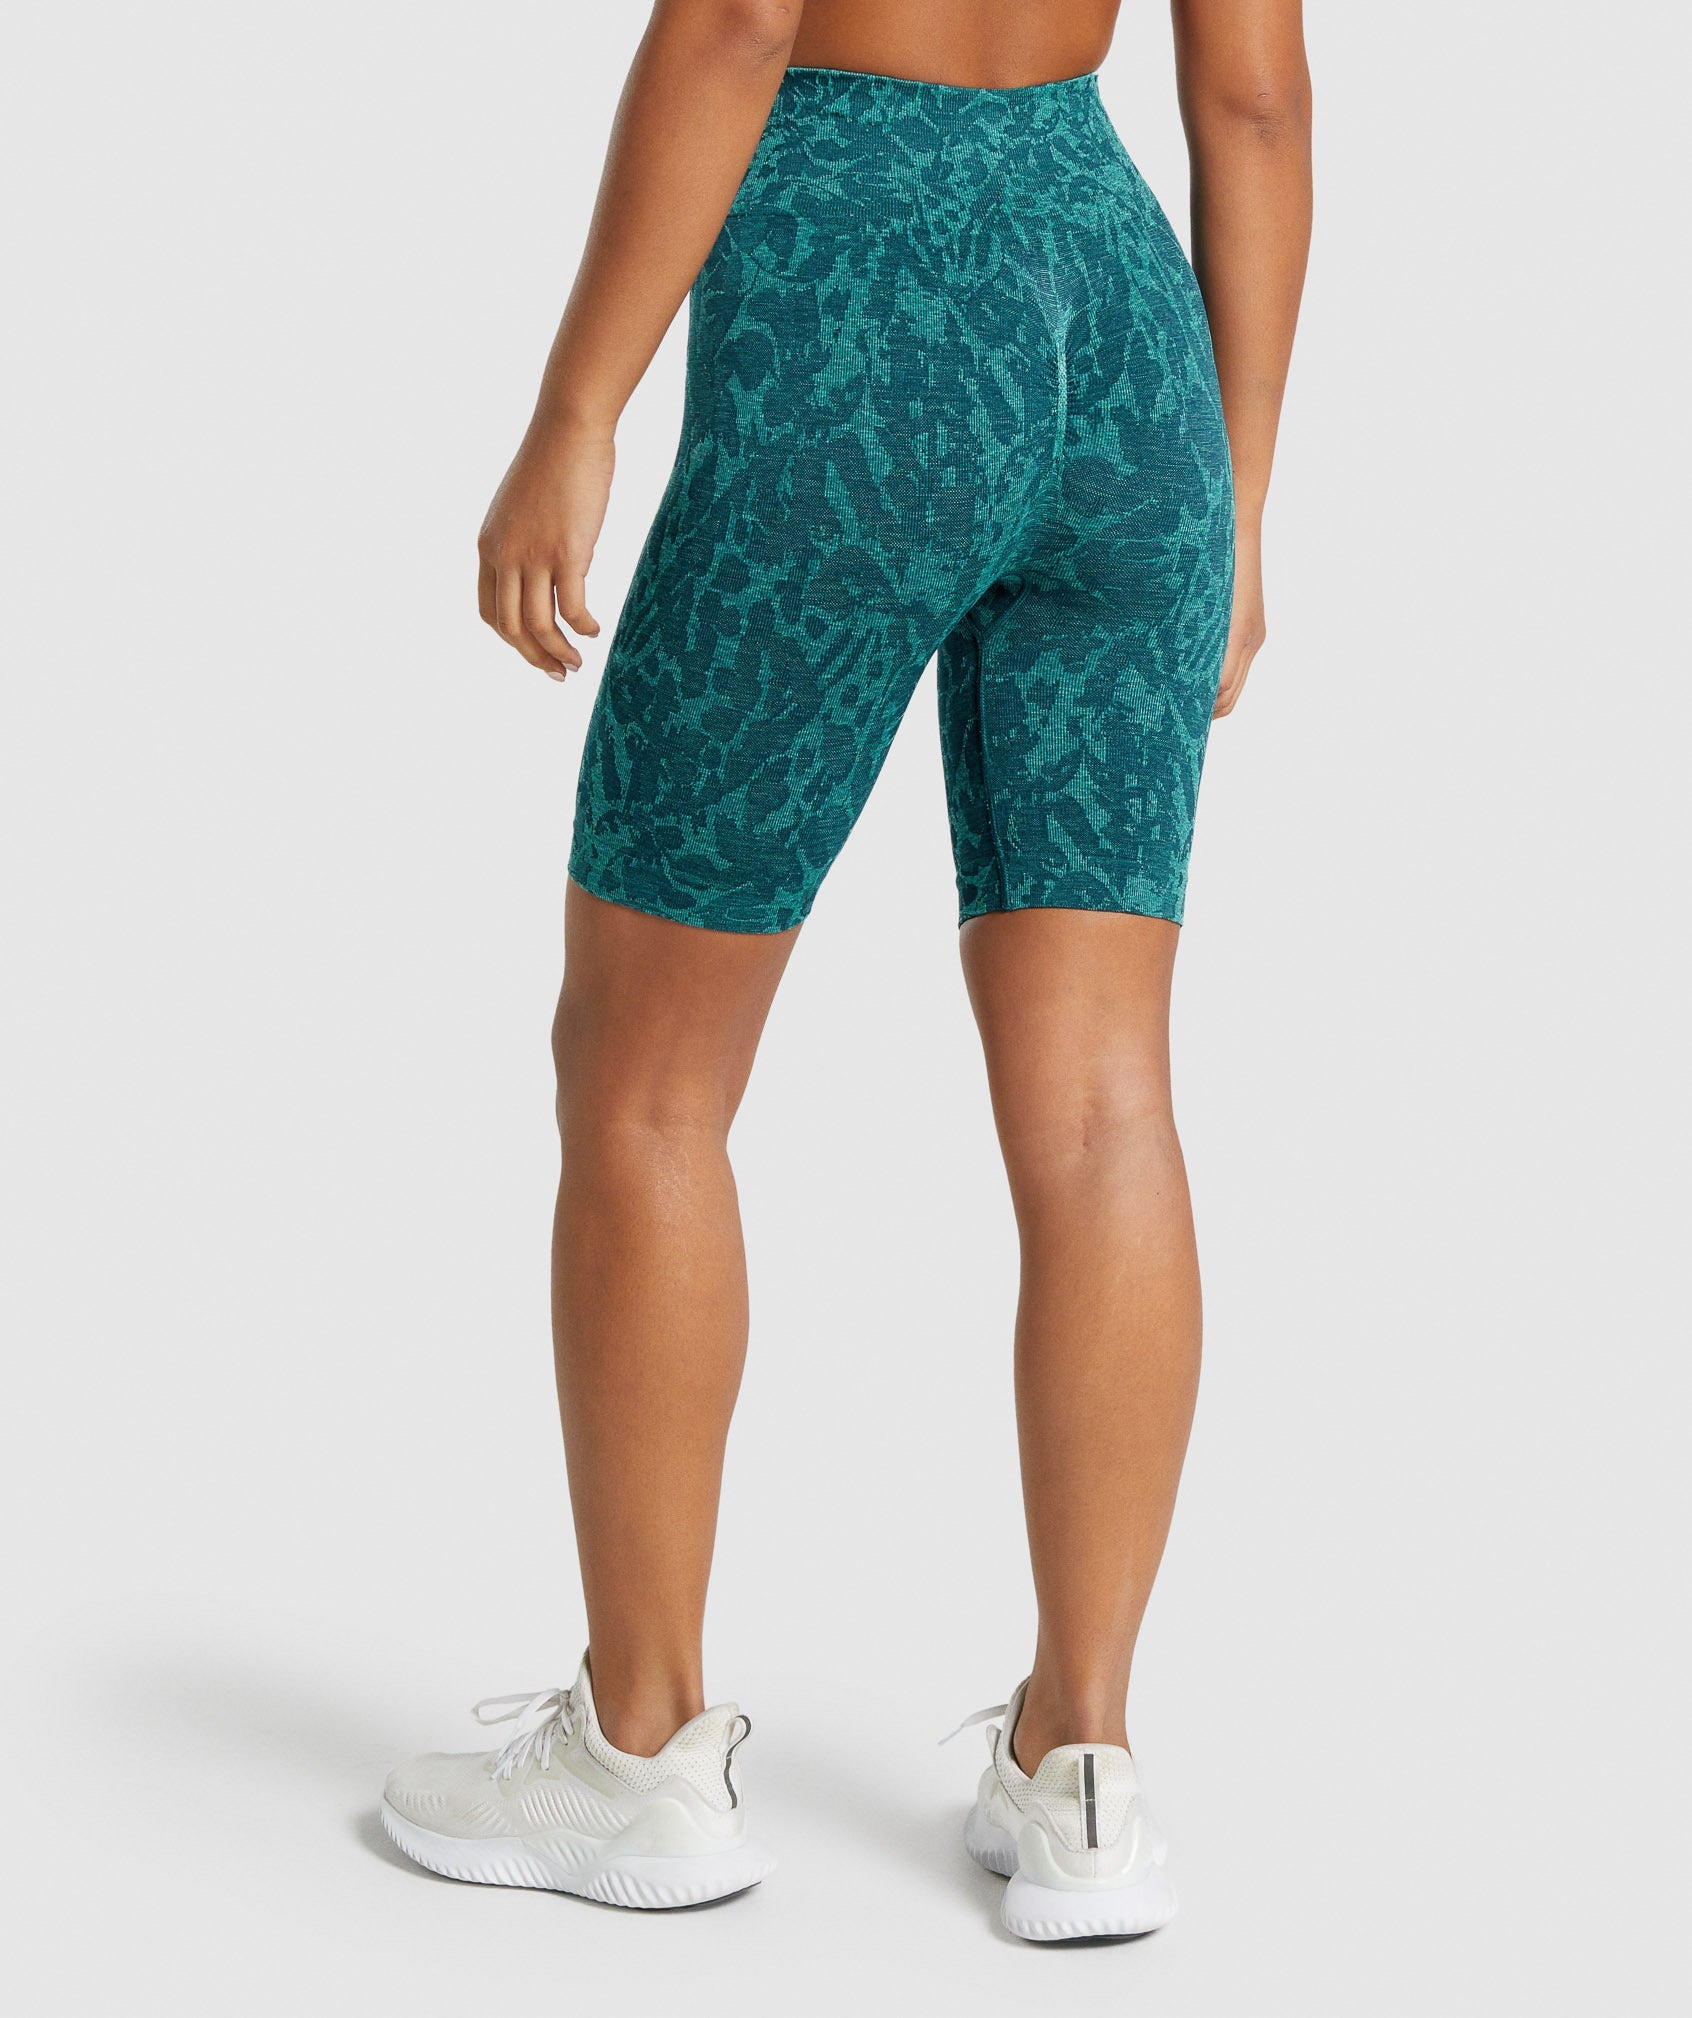 Adapt Animal Seamless Cycling Shorts in Butterfly | Teal - view 3